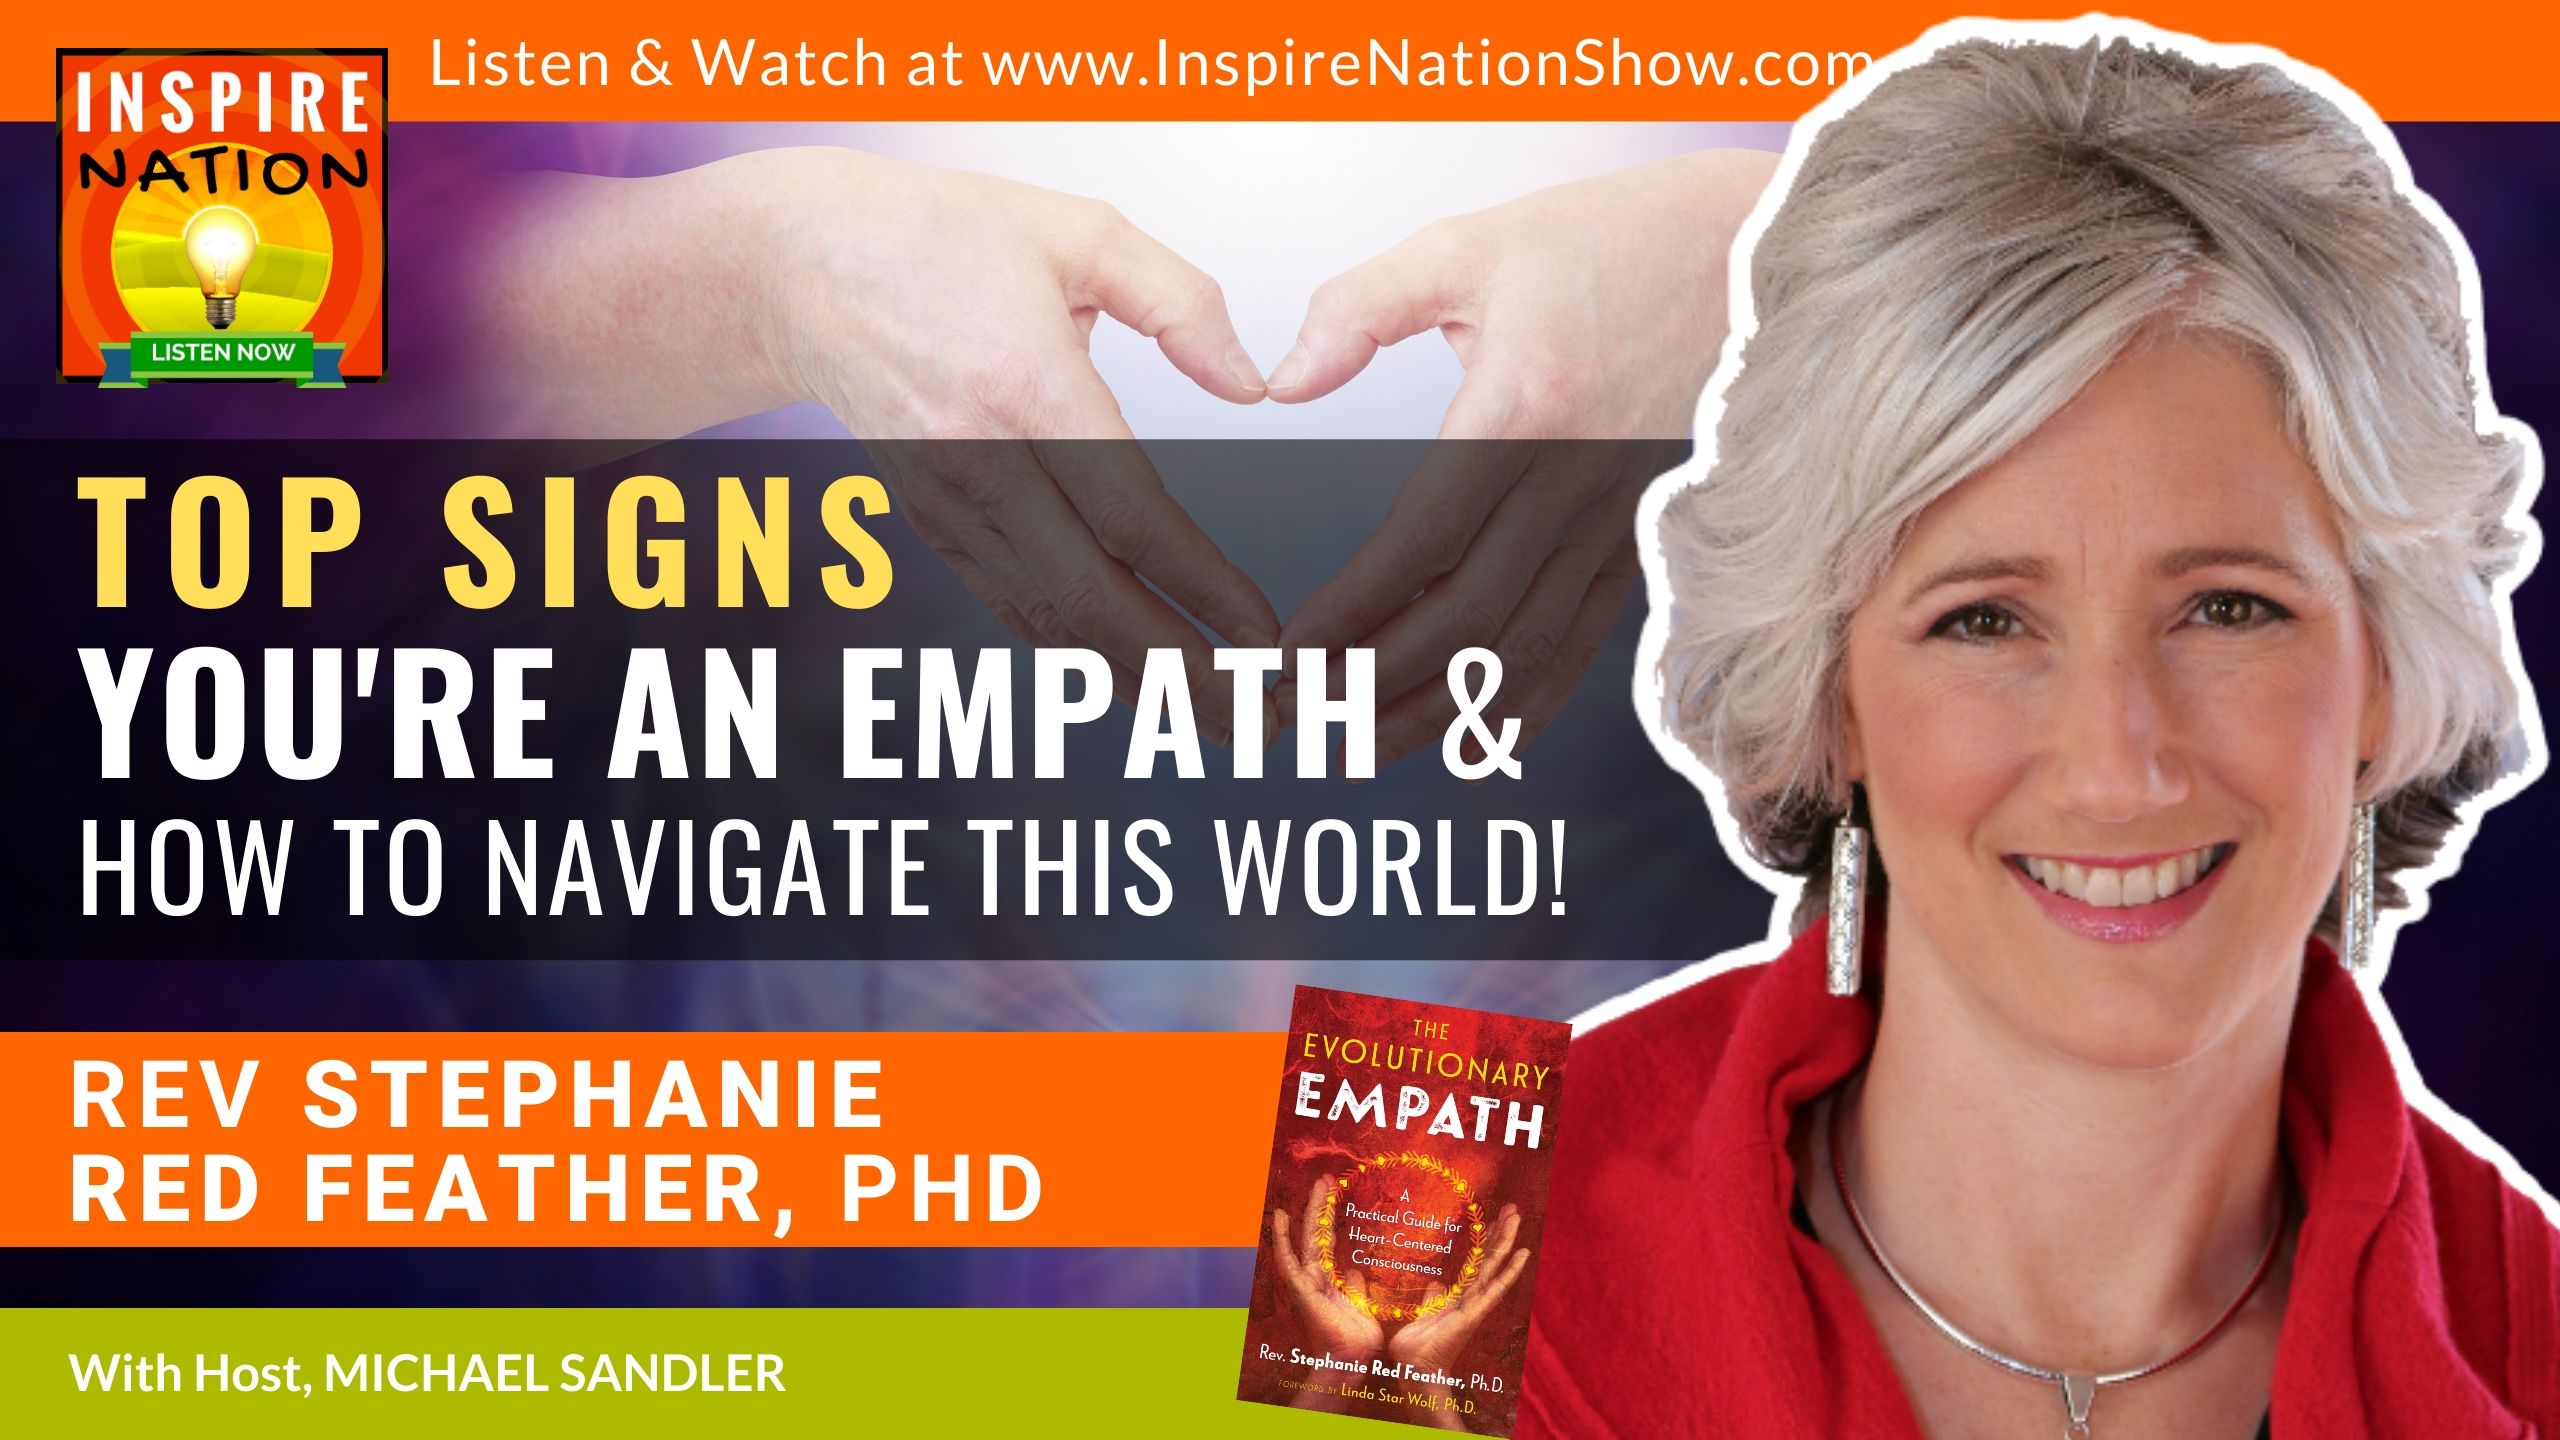 Michael Sandler interviews Dr Stephanie Red Feather on The Evolutionary Empath & signs that you may be an empath too!